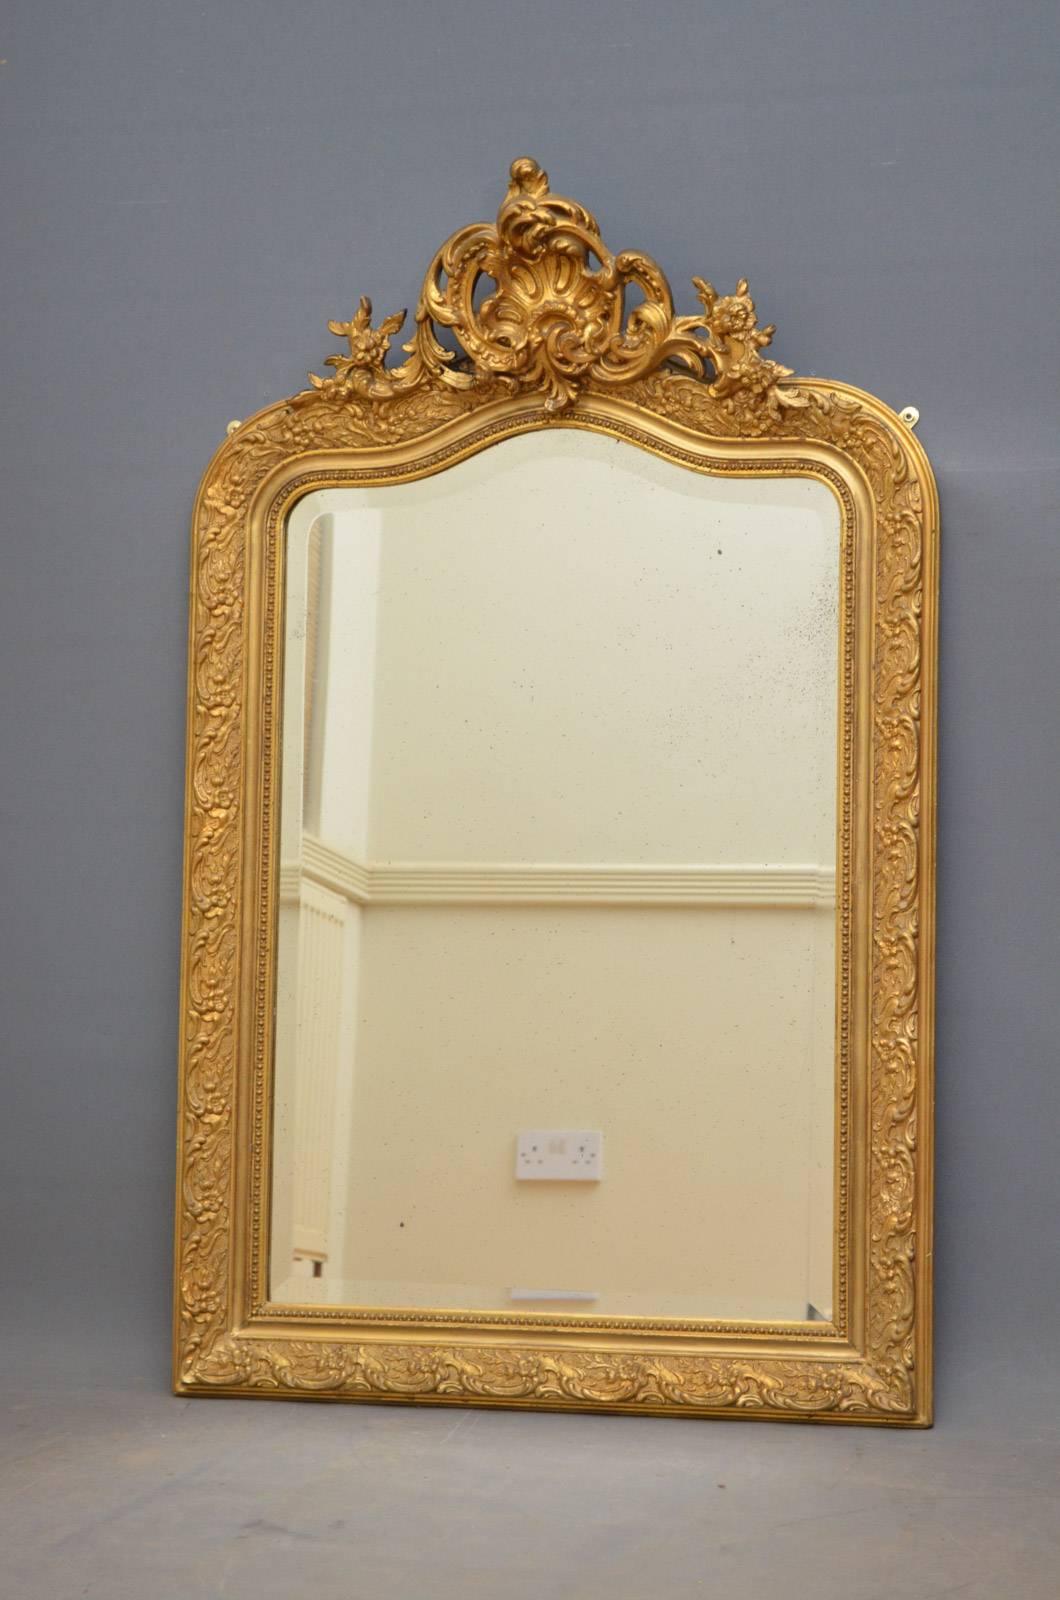 K0302, 19th century French mirror, having original bevelled edge glass with some foxing in finely decorated moulded frame with carved cartouche to centre. This antique mirror retains its original mirror plate and gilt, all in excellent home ready